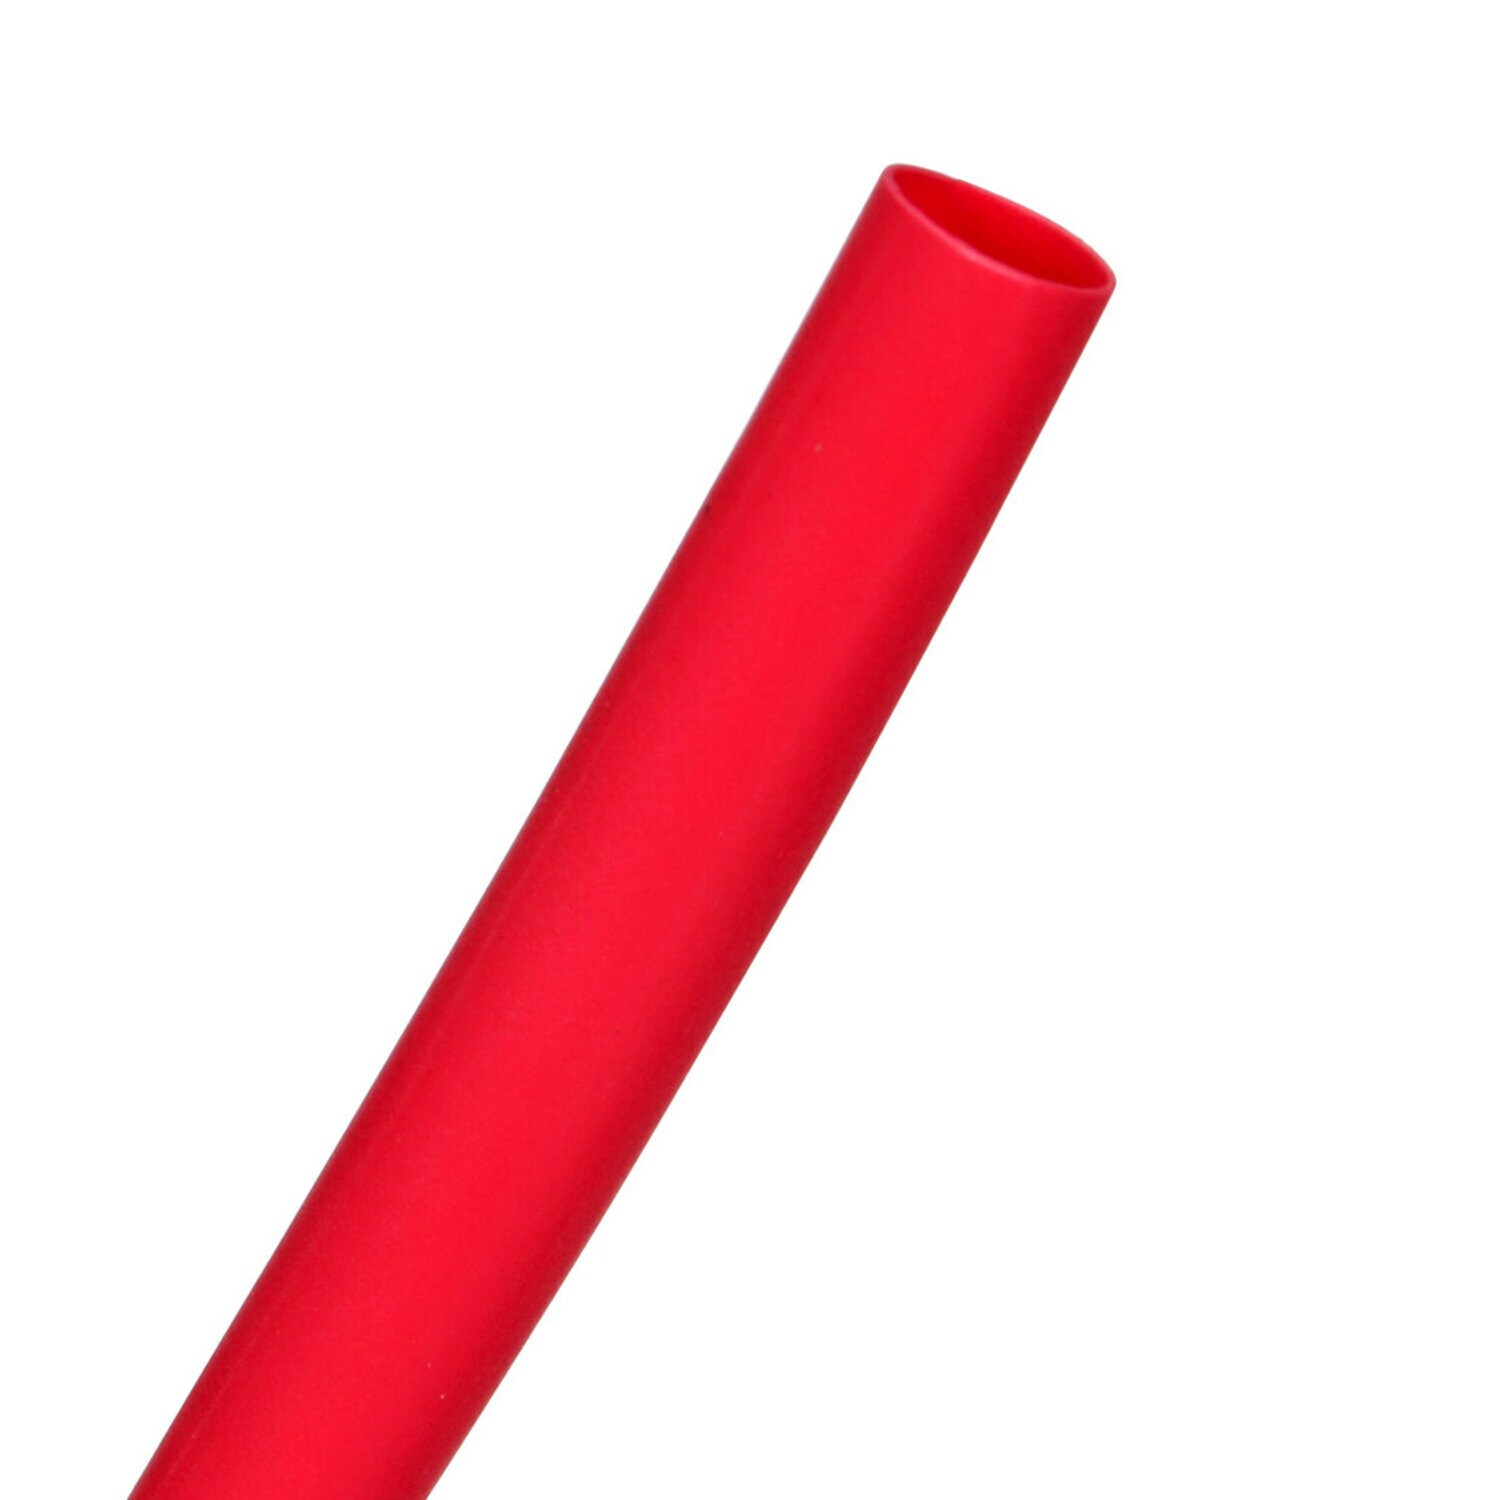 https://www.e-aircraftsupply.com/ItemImages/32/2327617E_3m-heat-shrink-thin-wall-tubing-fp-301-red.jpg